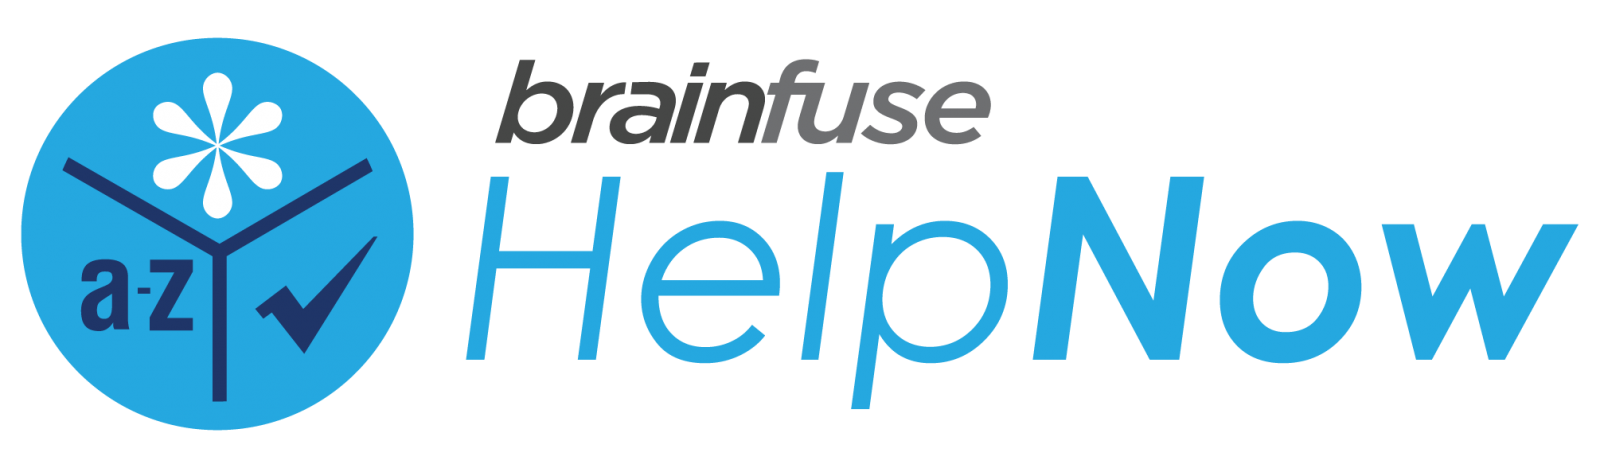 Brainfuse logo: Brainfuse help now 